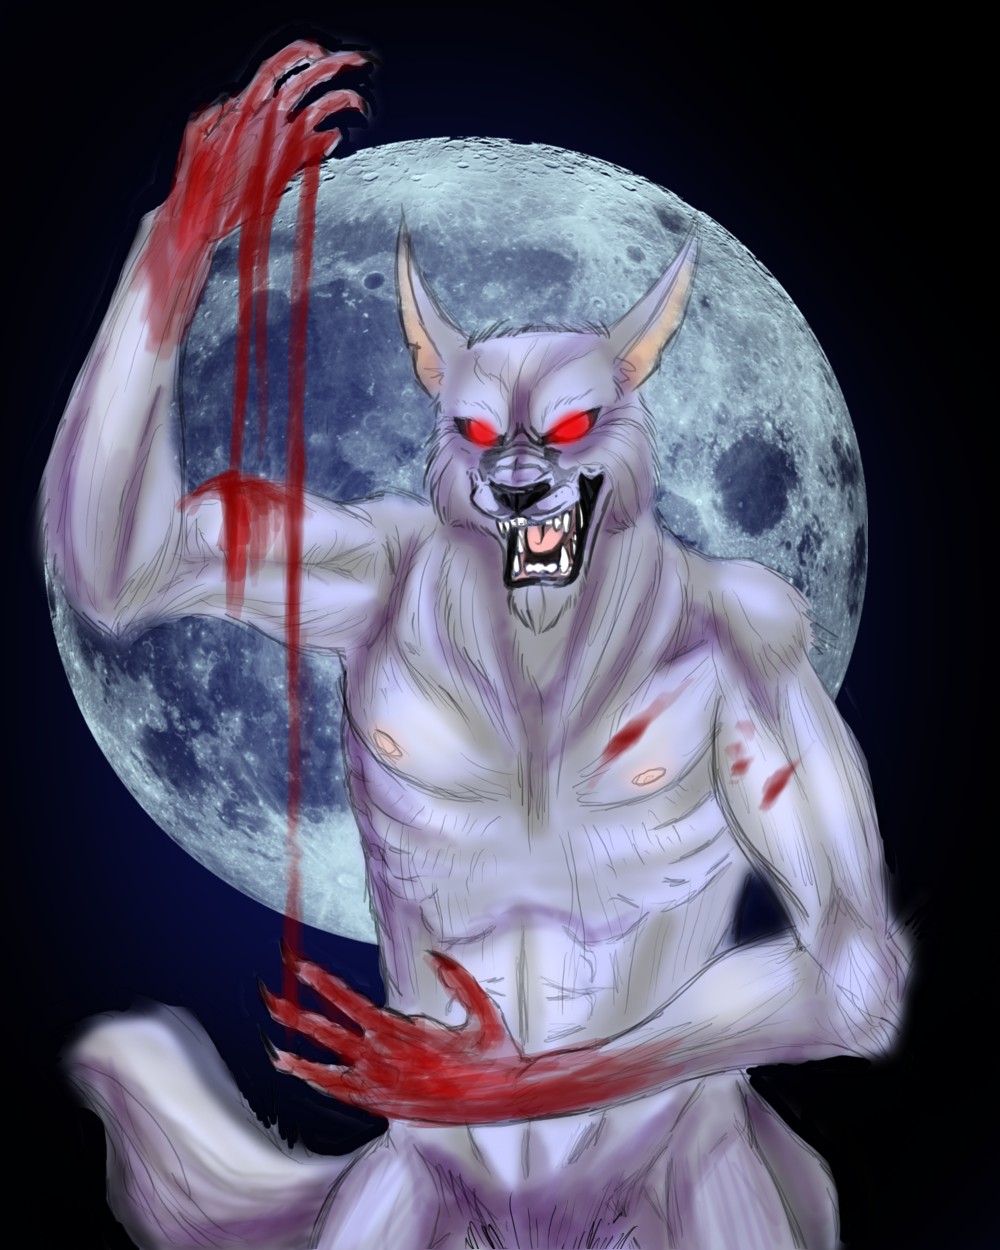 This is A Werewolf by TheGameArtCritic